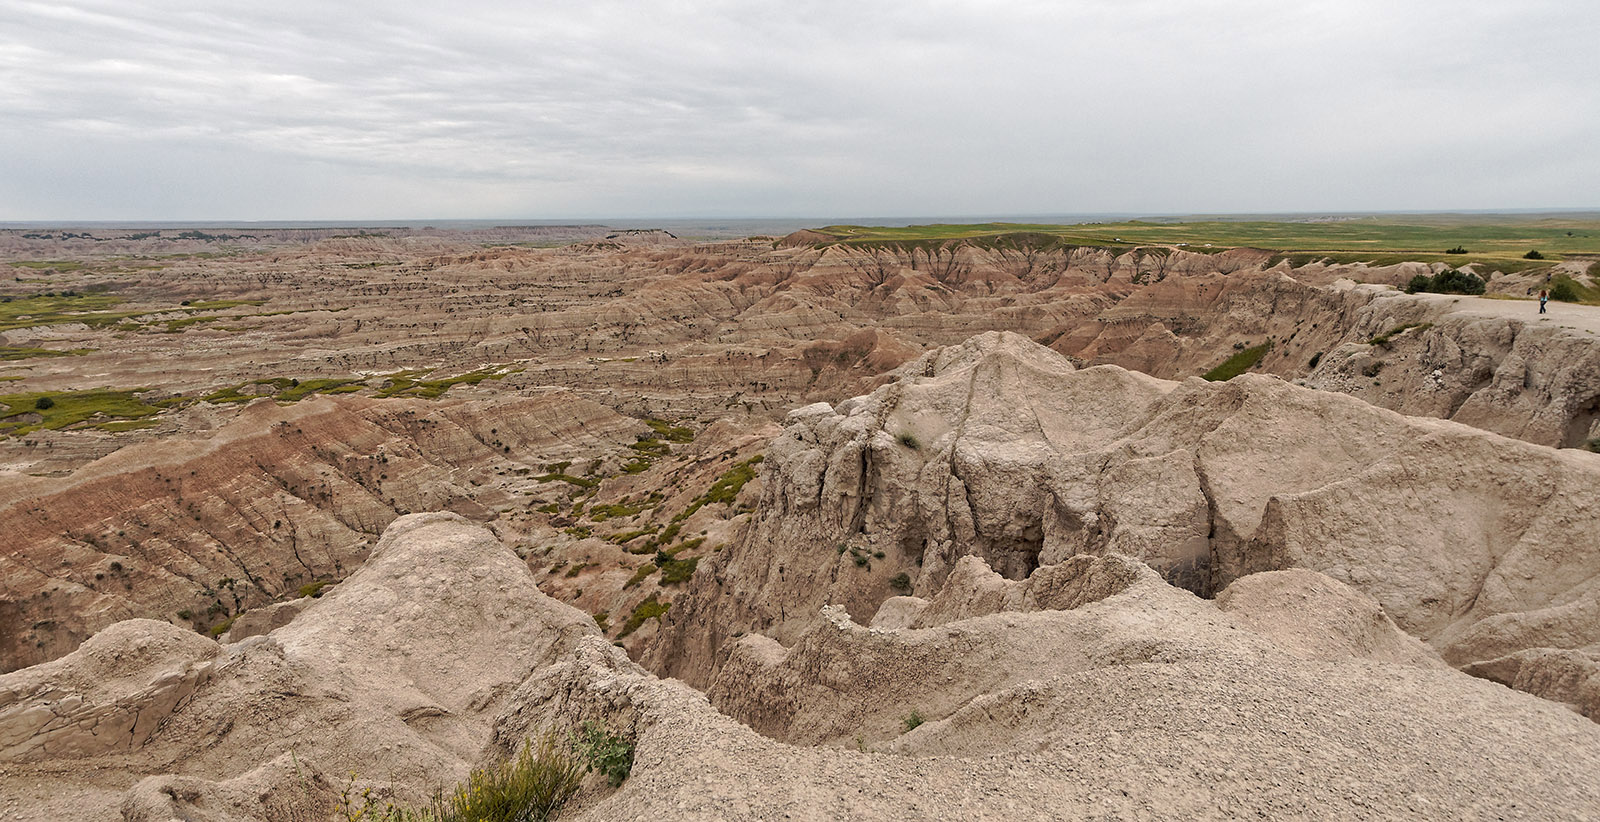 Badlands National Park, South Dakota.  Pinnacles overlook:  Most of the erosion has occurred in white volcanic ash that was deposited starting 27 million years ago.  Serious erosion began approximately 500,000 year ago when the High Plains became more elevated enhancing river flow.